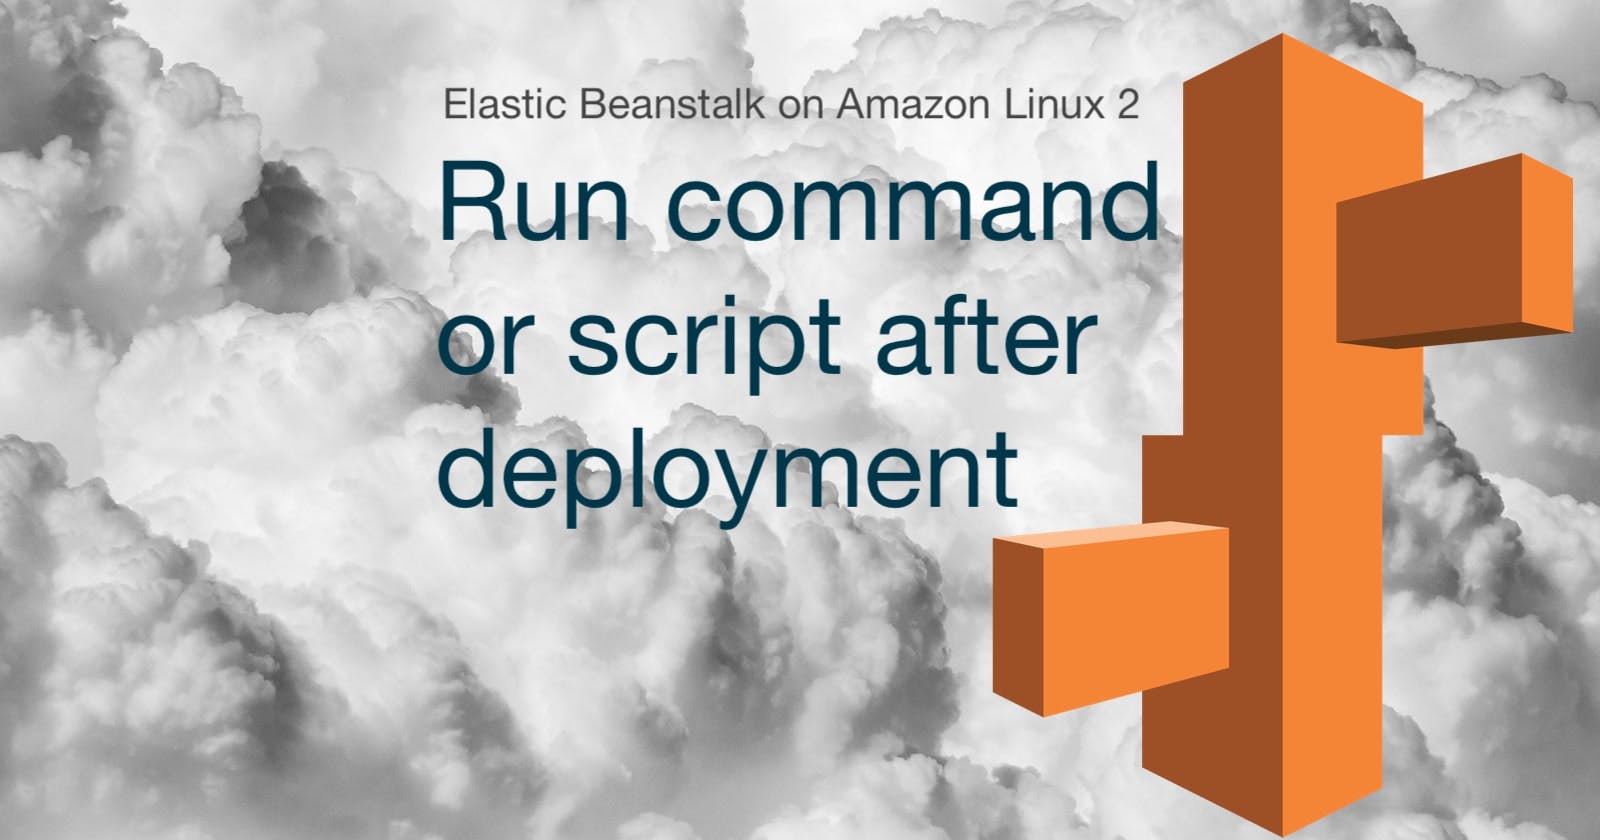 Run command or script after deployment
Elastic Beanstalk on Amazon Linux 2